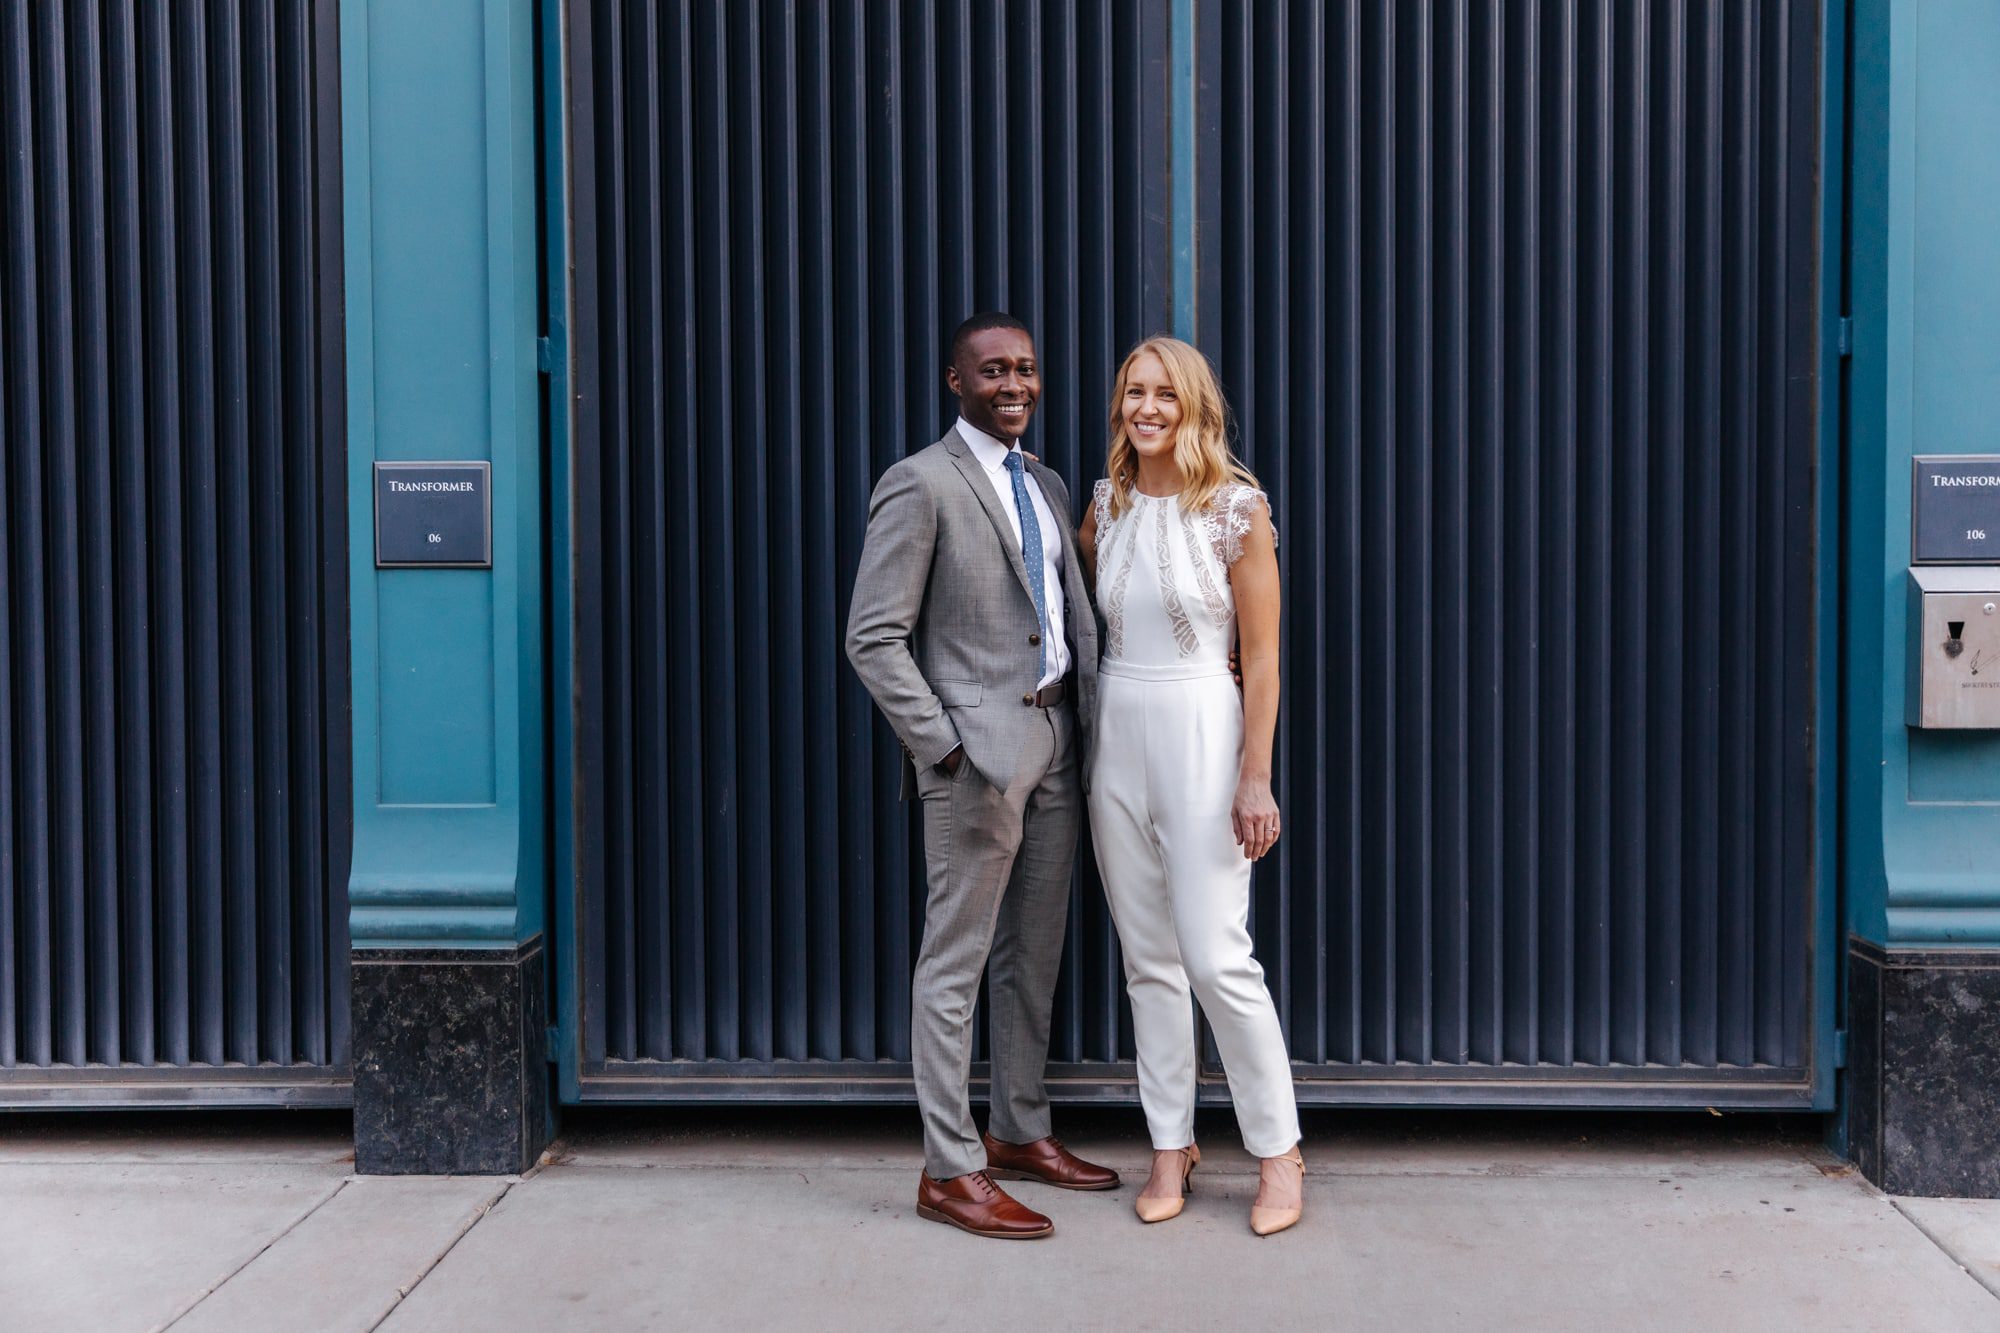 holding hands, formal outfit for elopement, outfit inspiration, bridal pantsuit, bridal jumpsuit, bride in pants, intimate wedding outfit, modern wedding outfits, courthouse wedding outfit, urban wedding photos, modern wedding photos, city wedding, colorado wedding photographer, colorado elopement, colorado wedding photographer